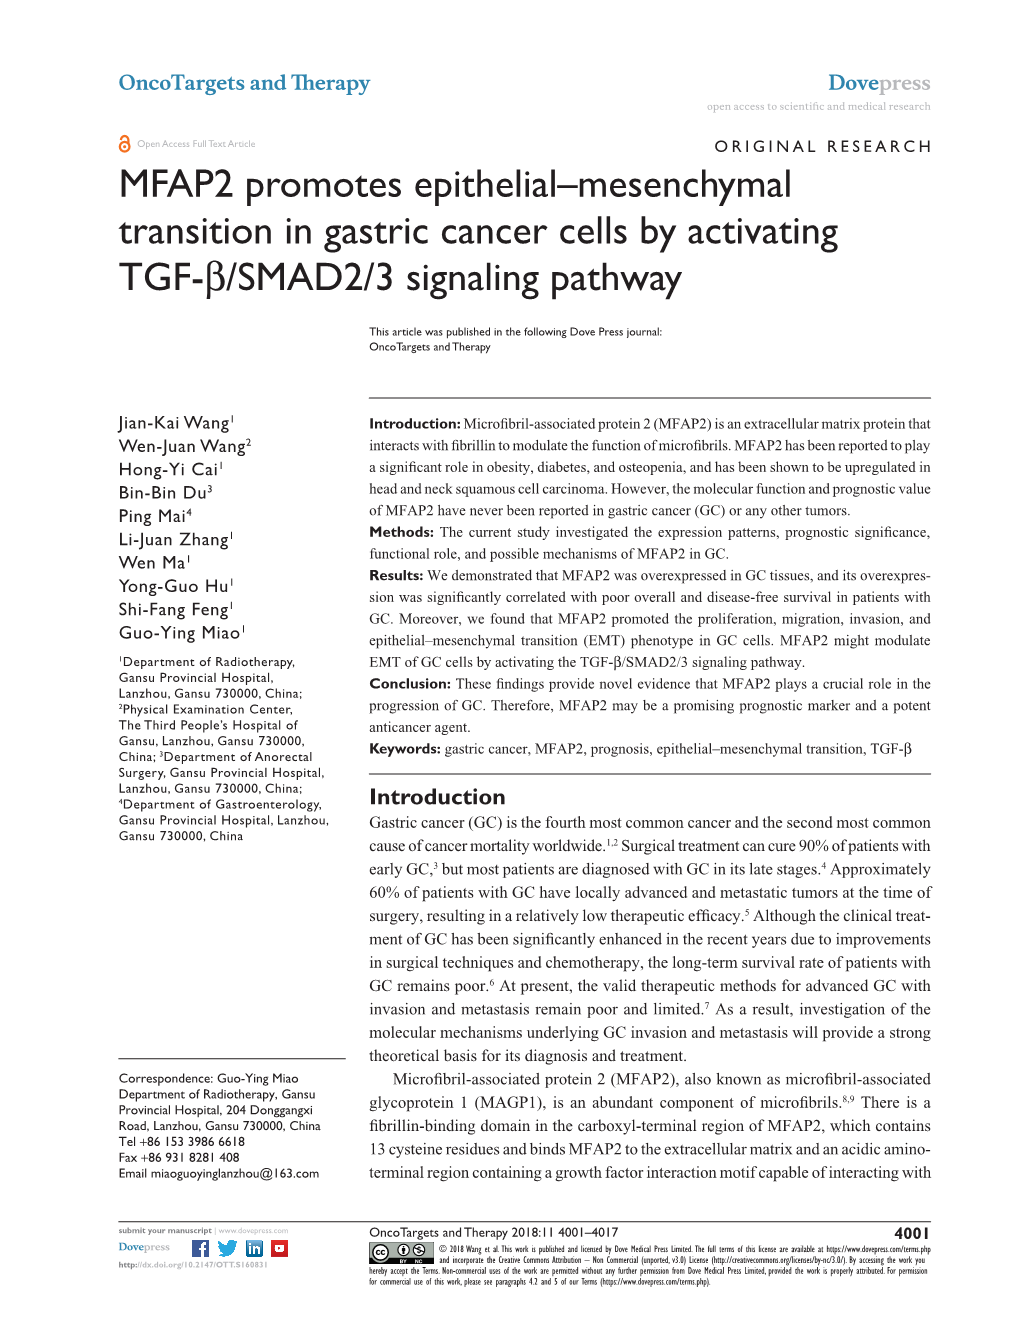 MFAP2 Promotes Epithelial–Mesenchymal Transition in Gastric Cancer Cells by Activating TGF-Β/SMAD2/3 Signaling Pathway